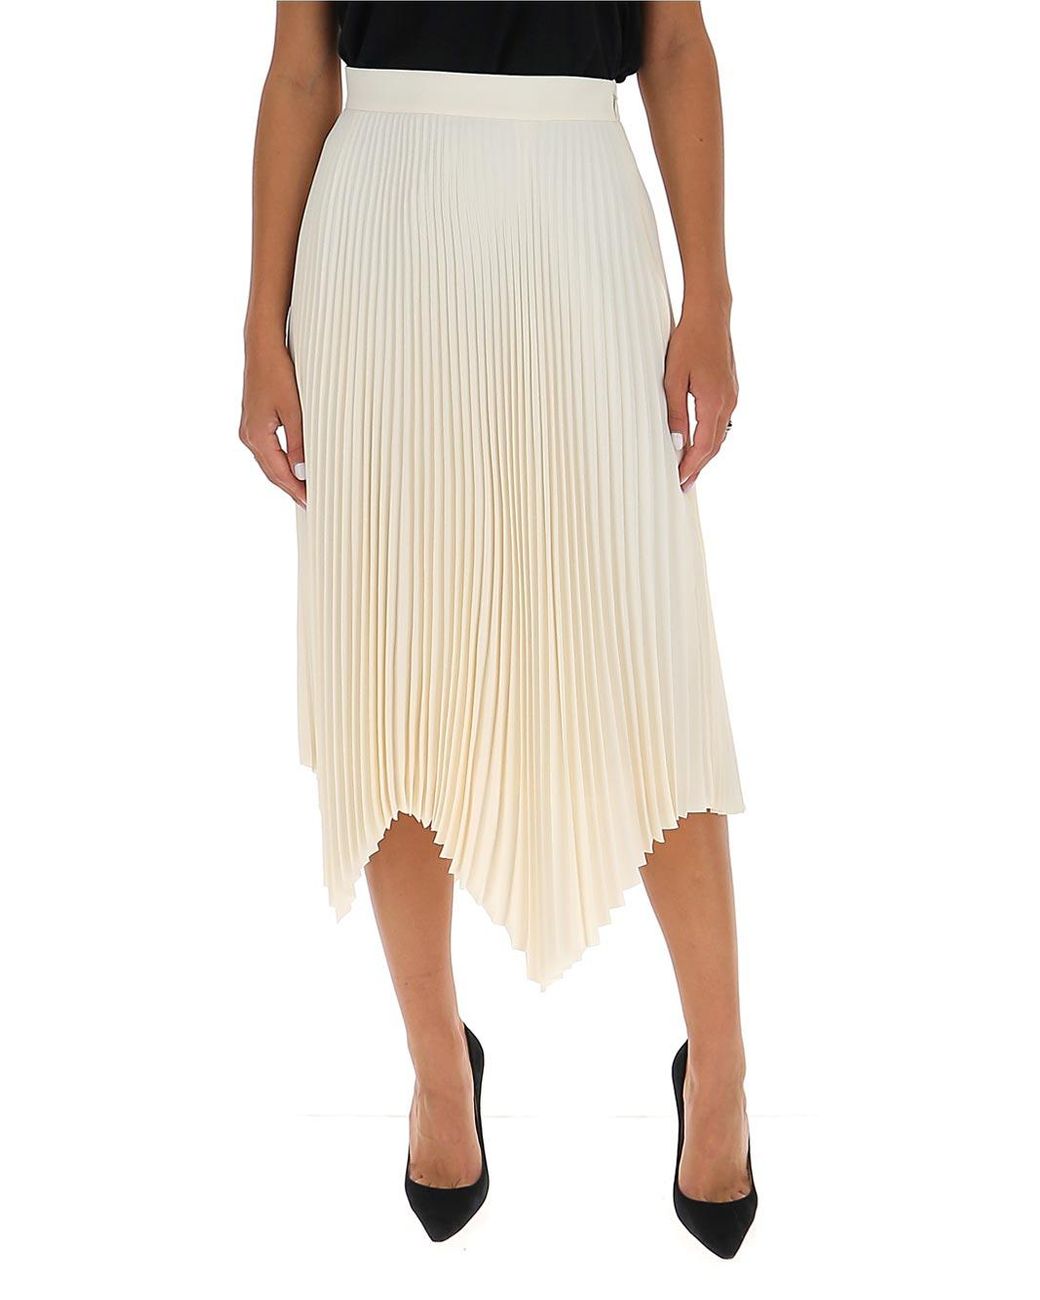 Tory Burch Synthetic Sunburst Pleated Skirt in White - Lyst